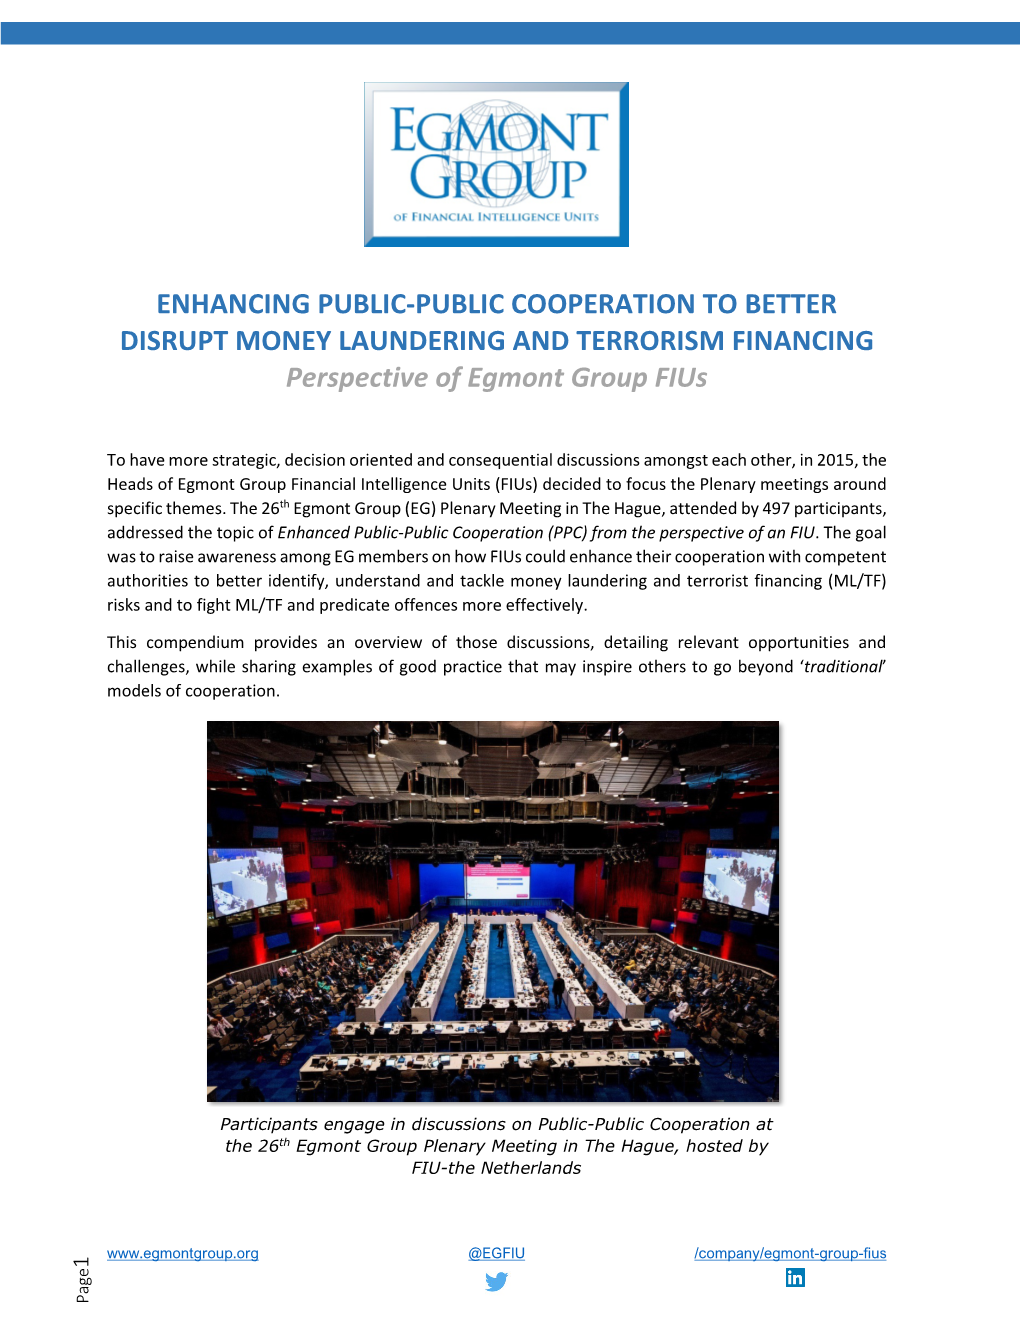 ENHANCING PUBLIC-PUBLIC COOPERATION to BETTER DISRUPT MONEY LAUNDERING and TERRORISM FINANCING Perspective of Egmont Group Fius